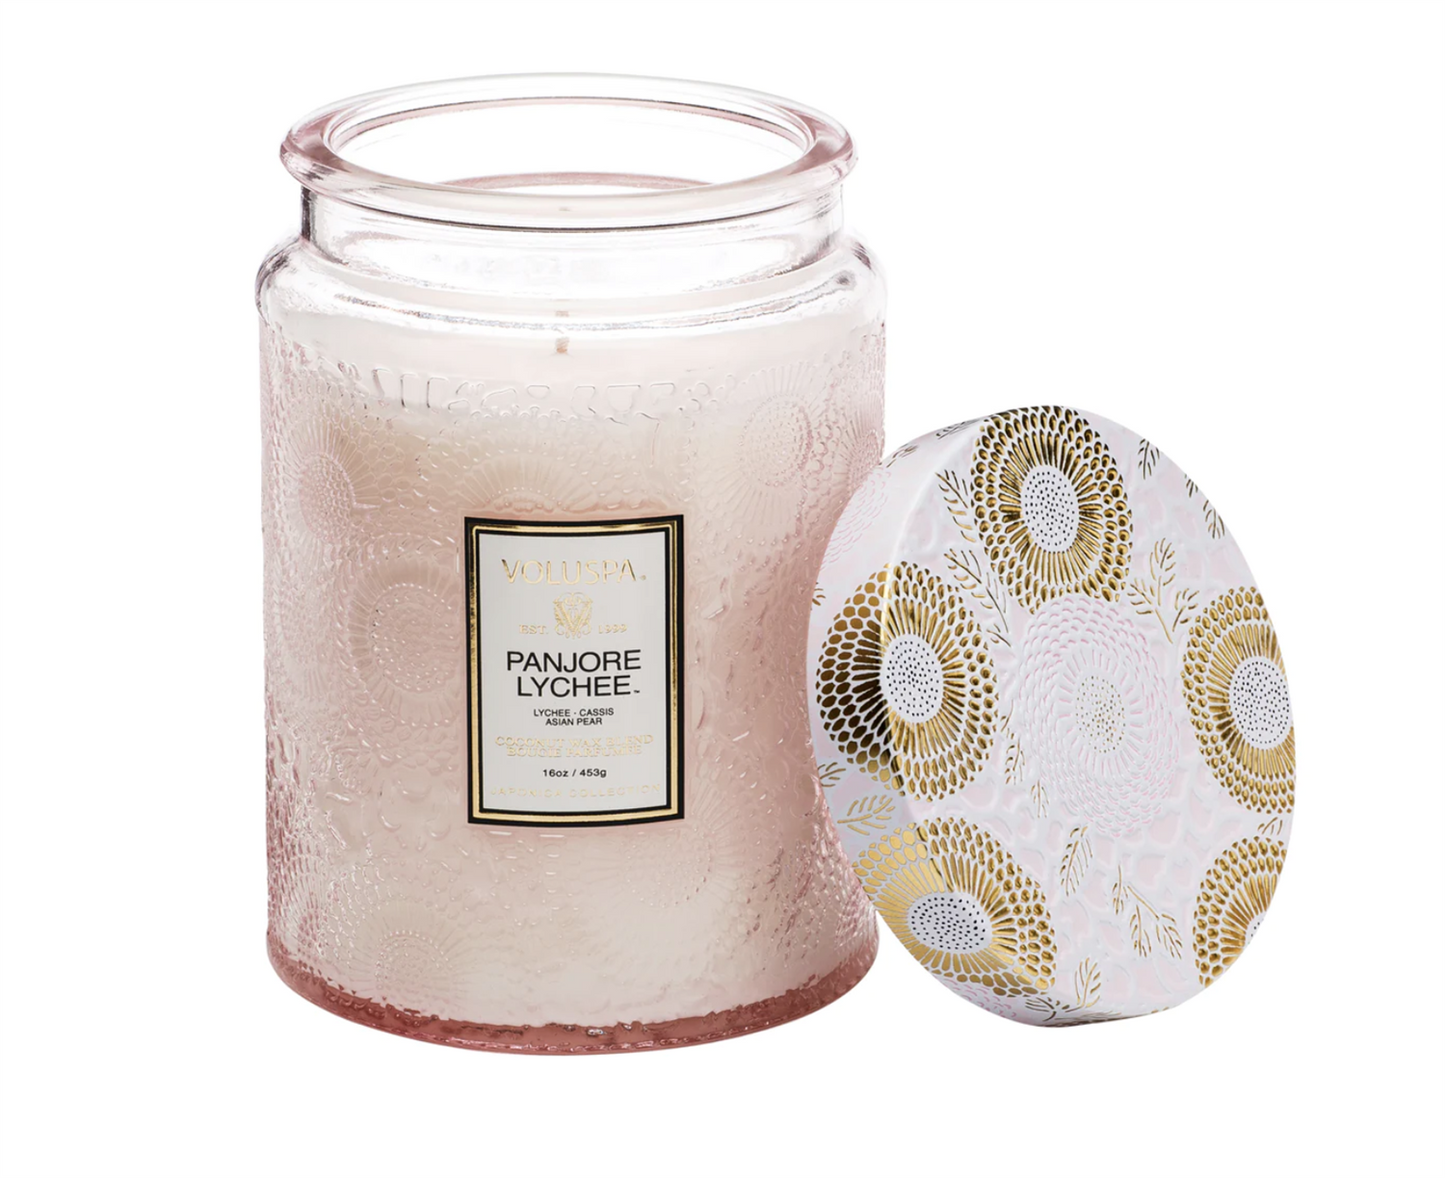 Large Jar Candle - Panjore Lychee